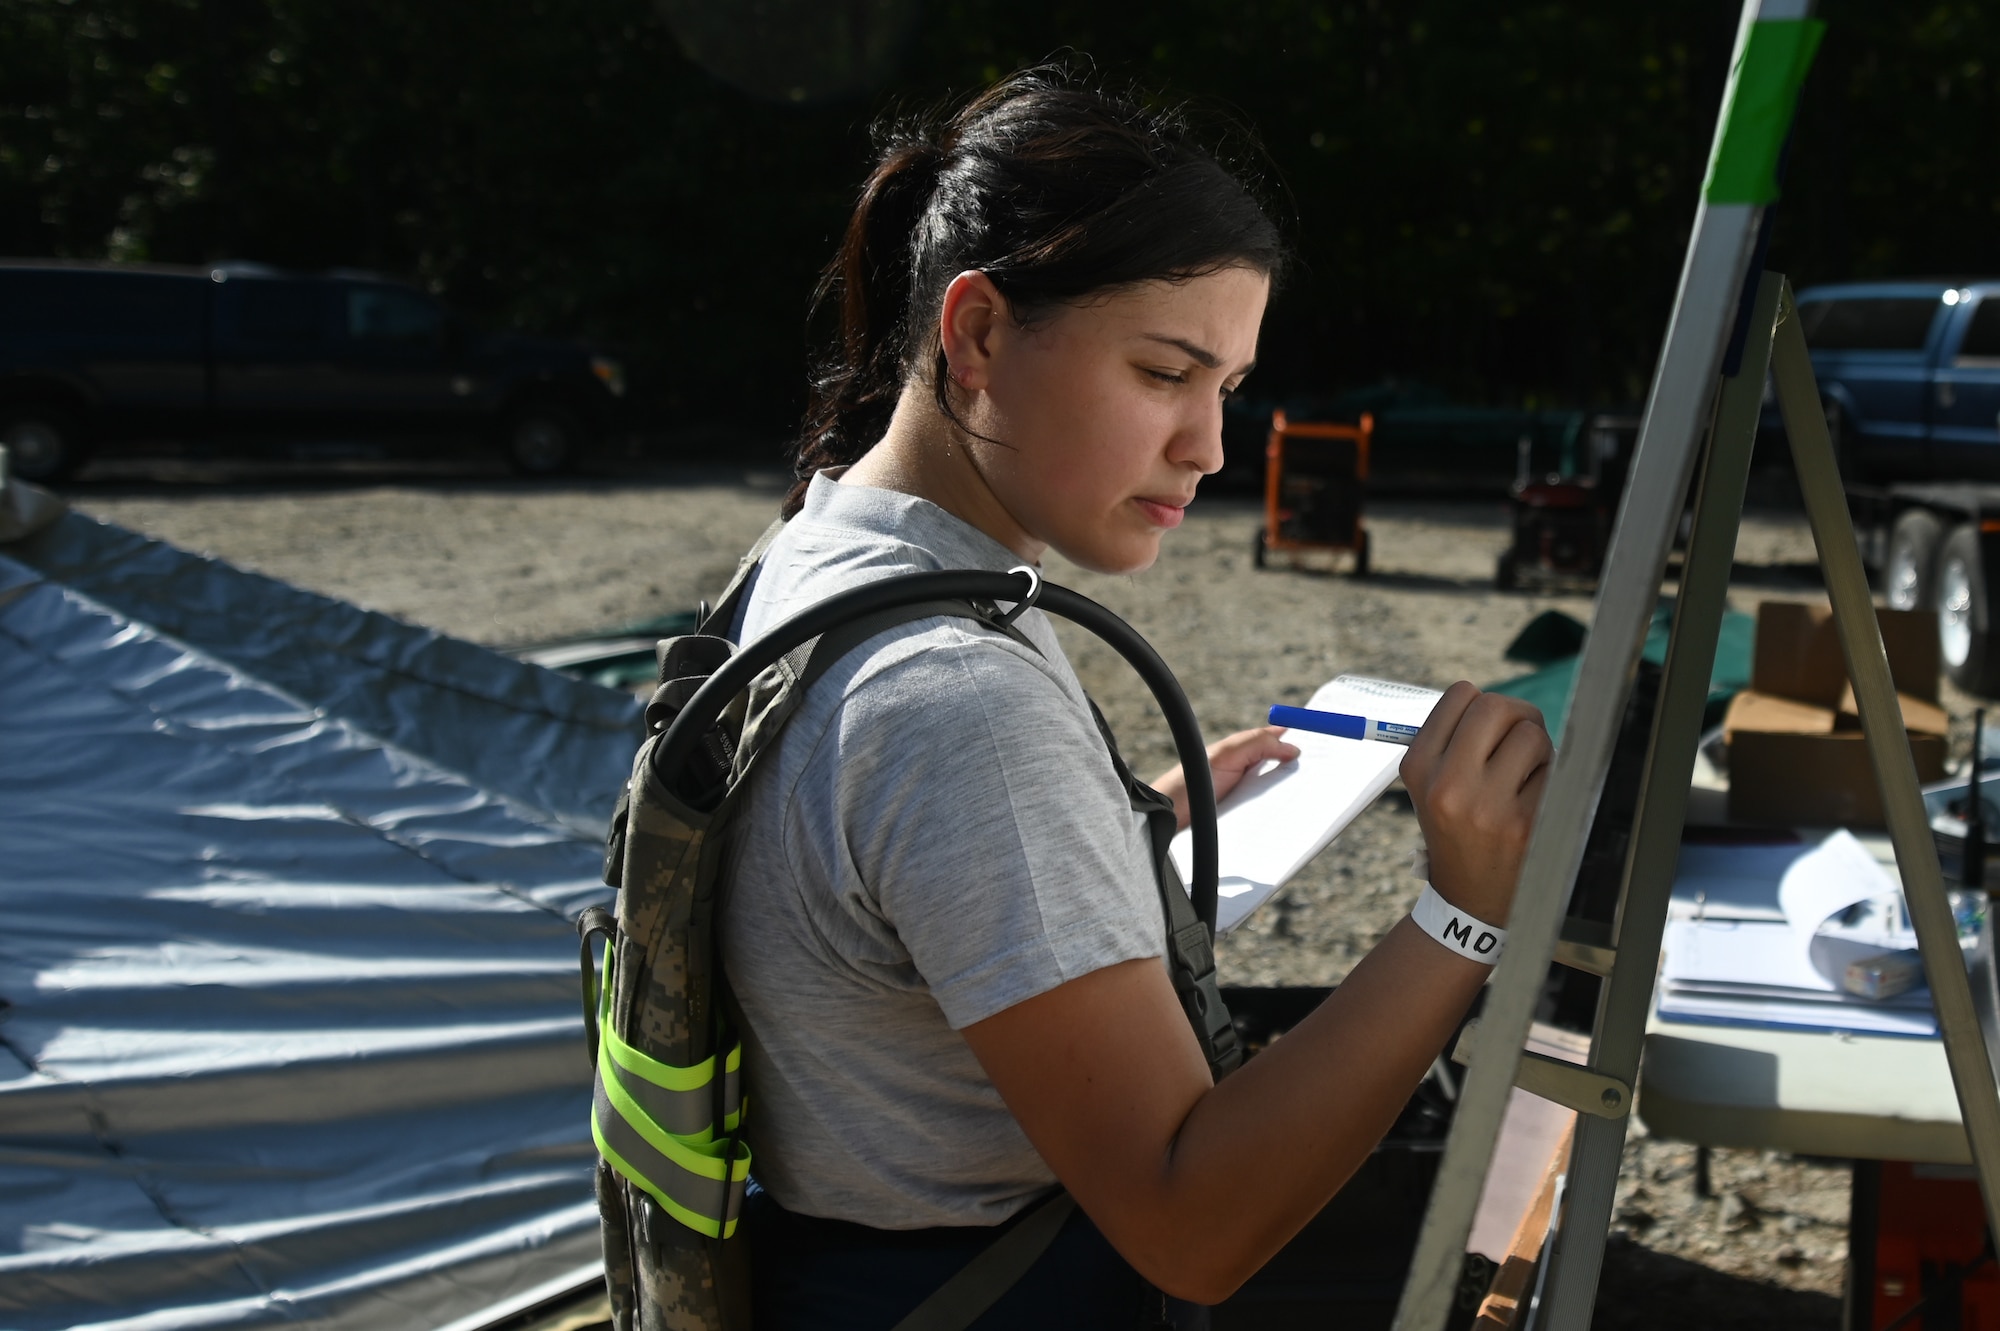 U.S. Air Force Airman 1st Class Destiny Melendez, 113th Fatality Search and Recovery Team Tactical Operations Center, D.C. Air National Guard, writes on a board during the Chemical Biological Radiological Nuclear Emergency Response Force Package pre-evaluation and training at the Fort Pickett Maneuver Training Center in Blackstone, Virginia, Aug. 27, 2021. (U.S. Air National Guard photo by Airman 1st Class Daira Jackson)